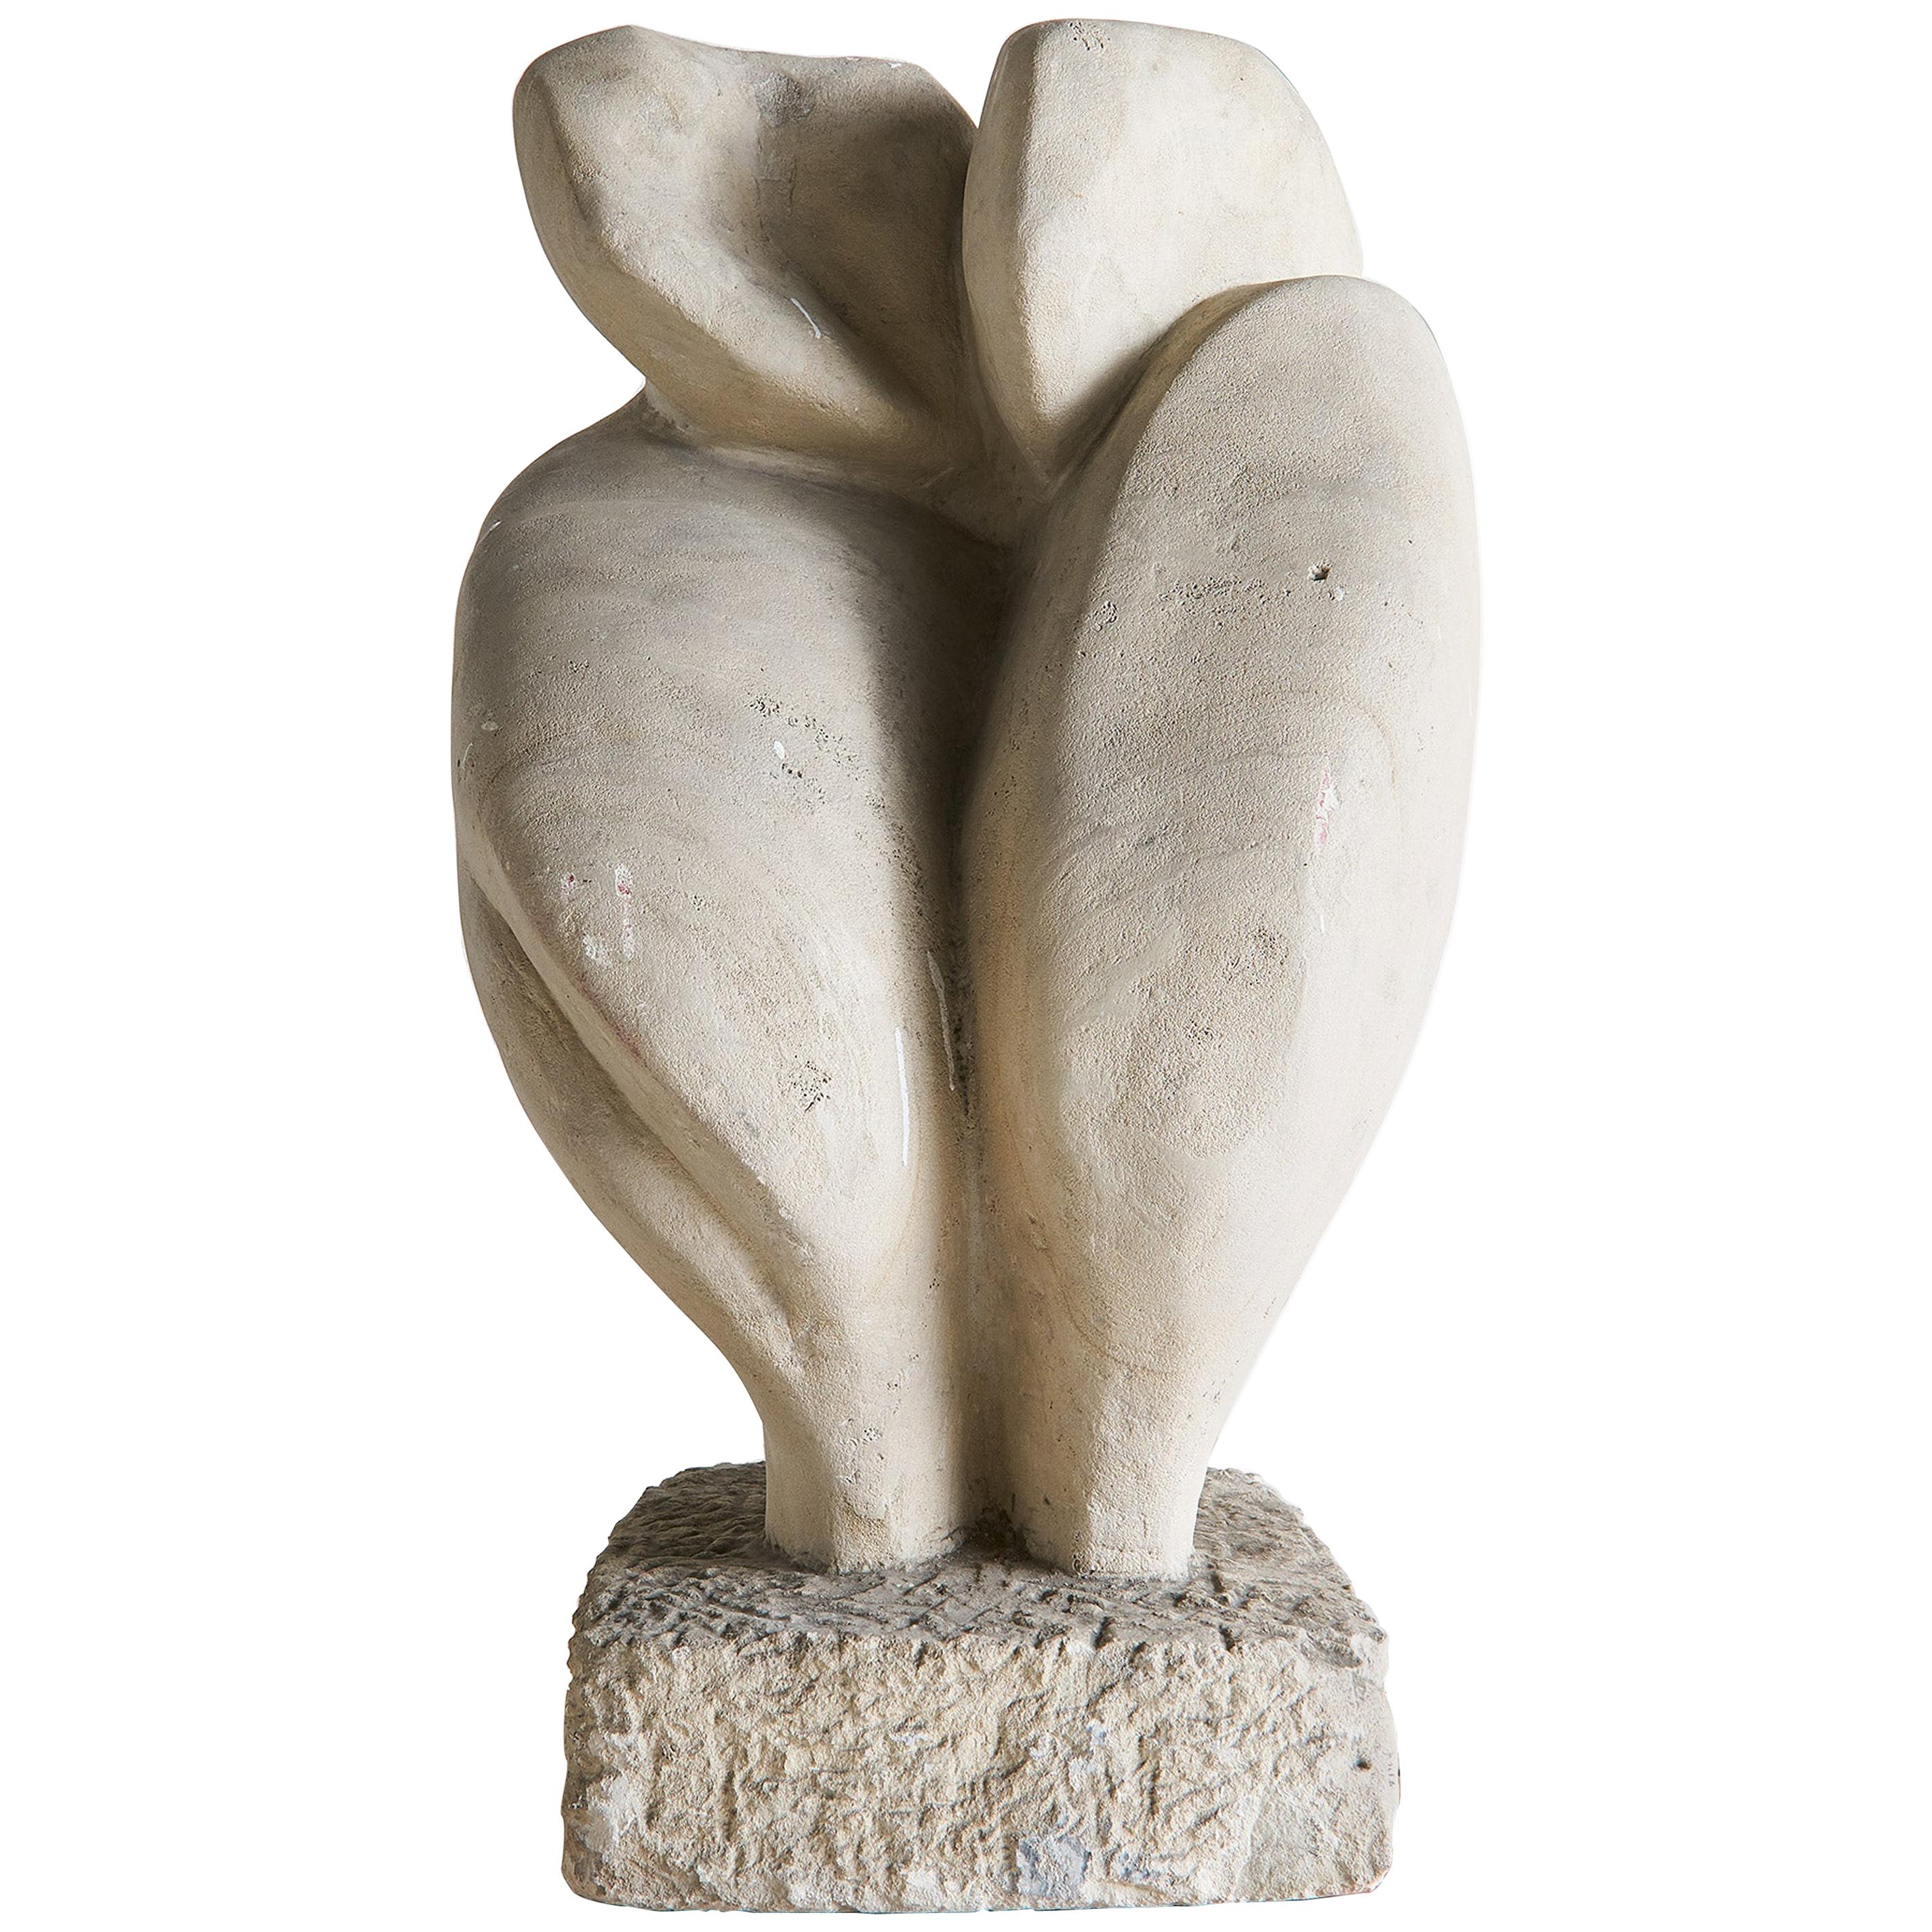 Abstract Figural Stone Sculpture